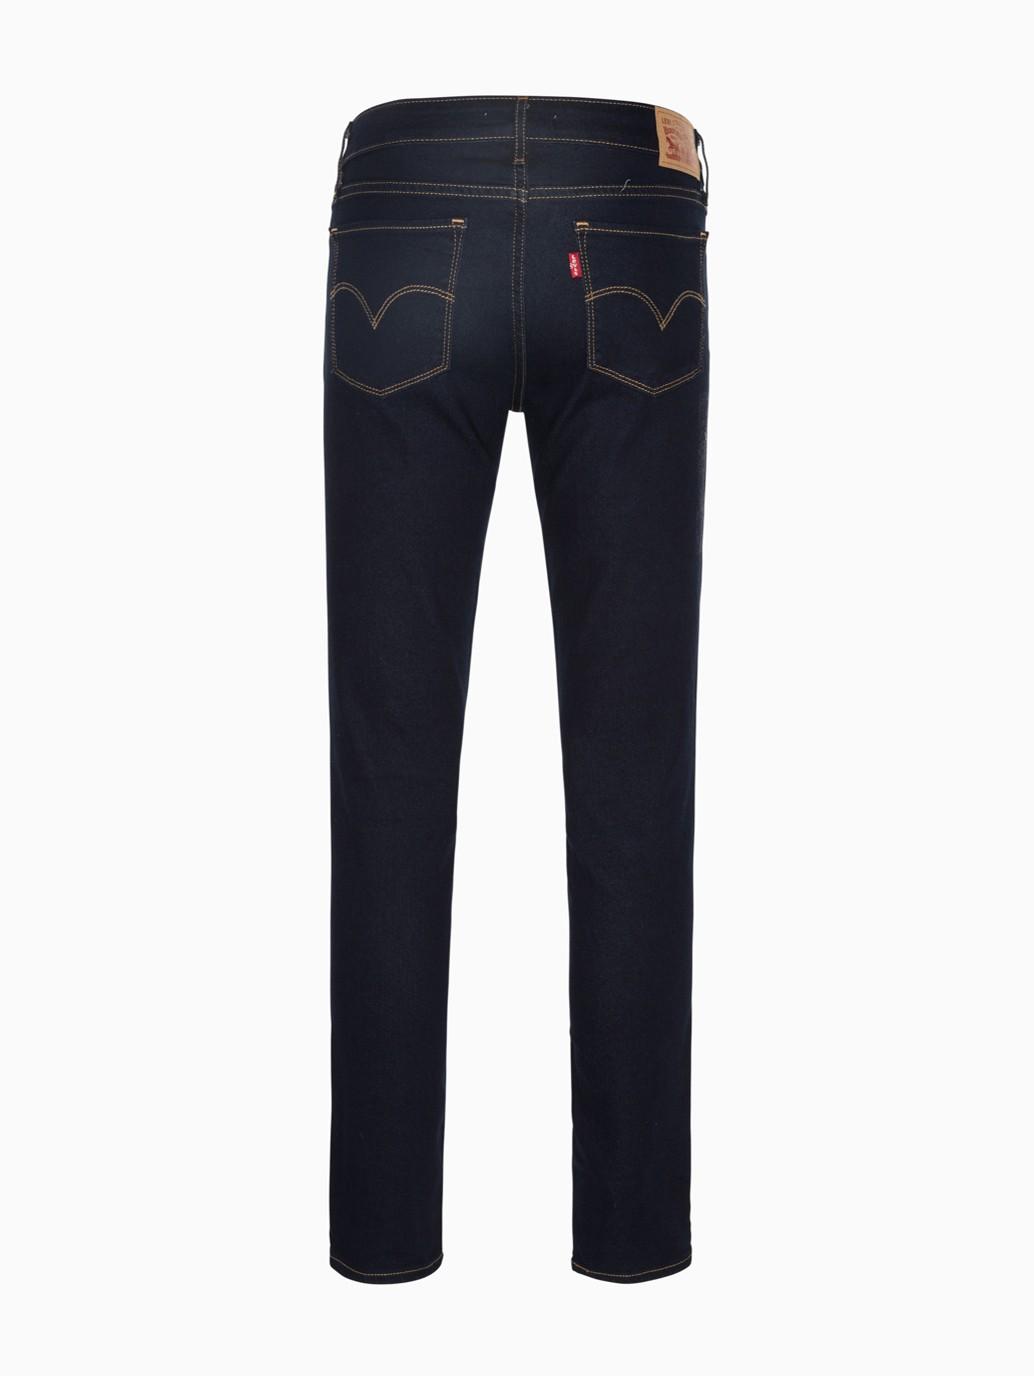 levis malaysia Levis 711 Skinny Jeans 188810012 14 Details